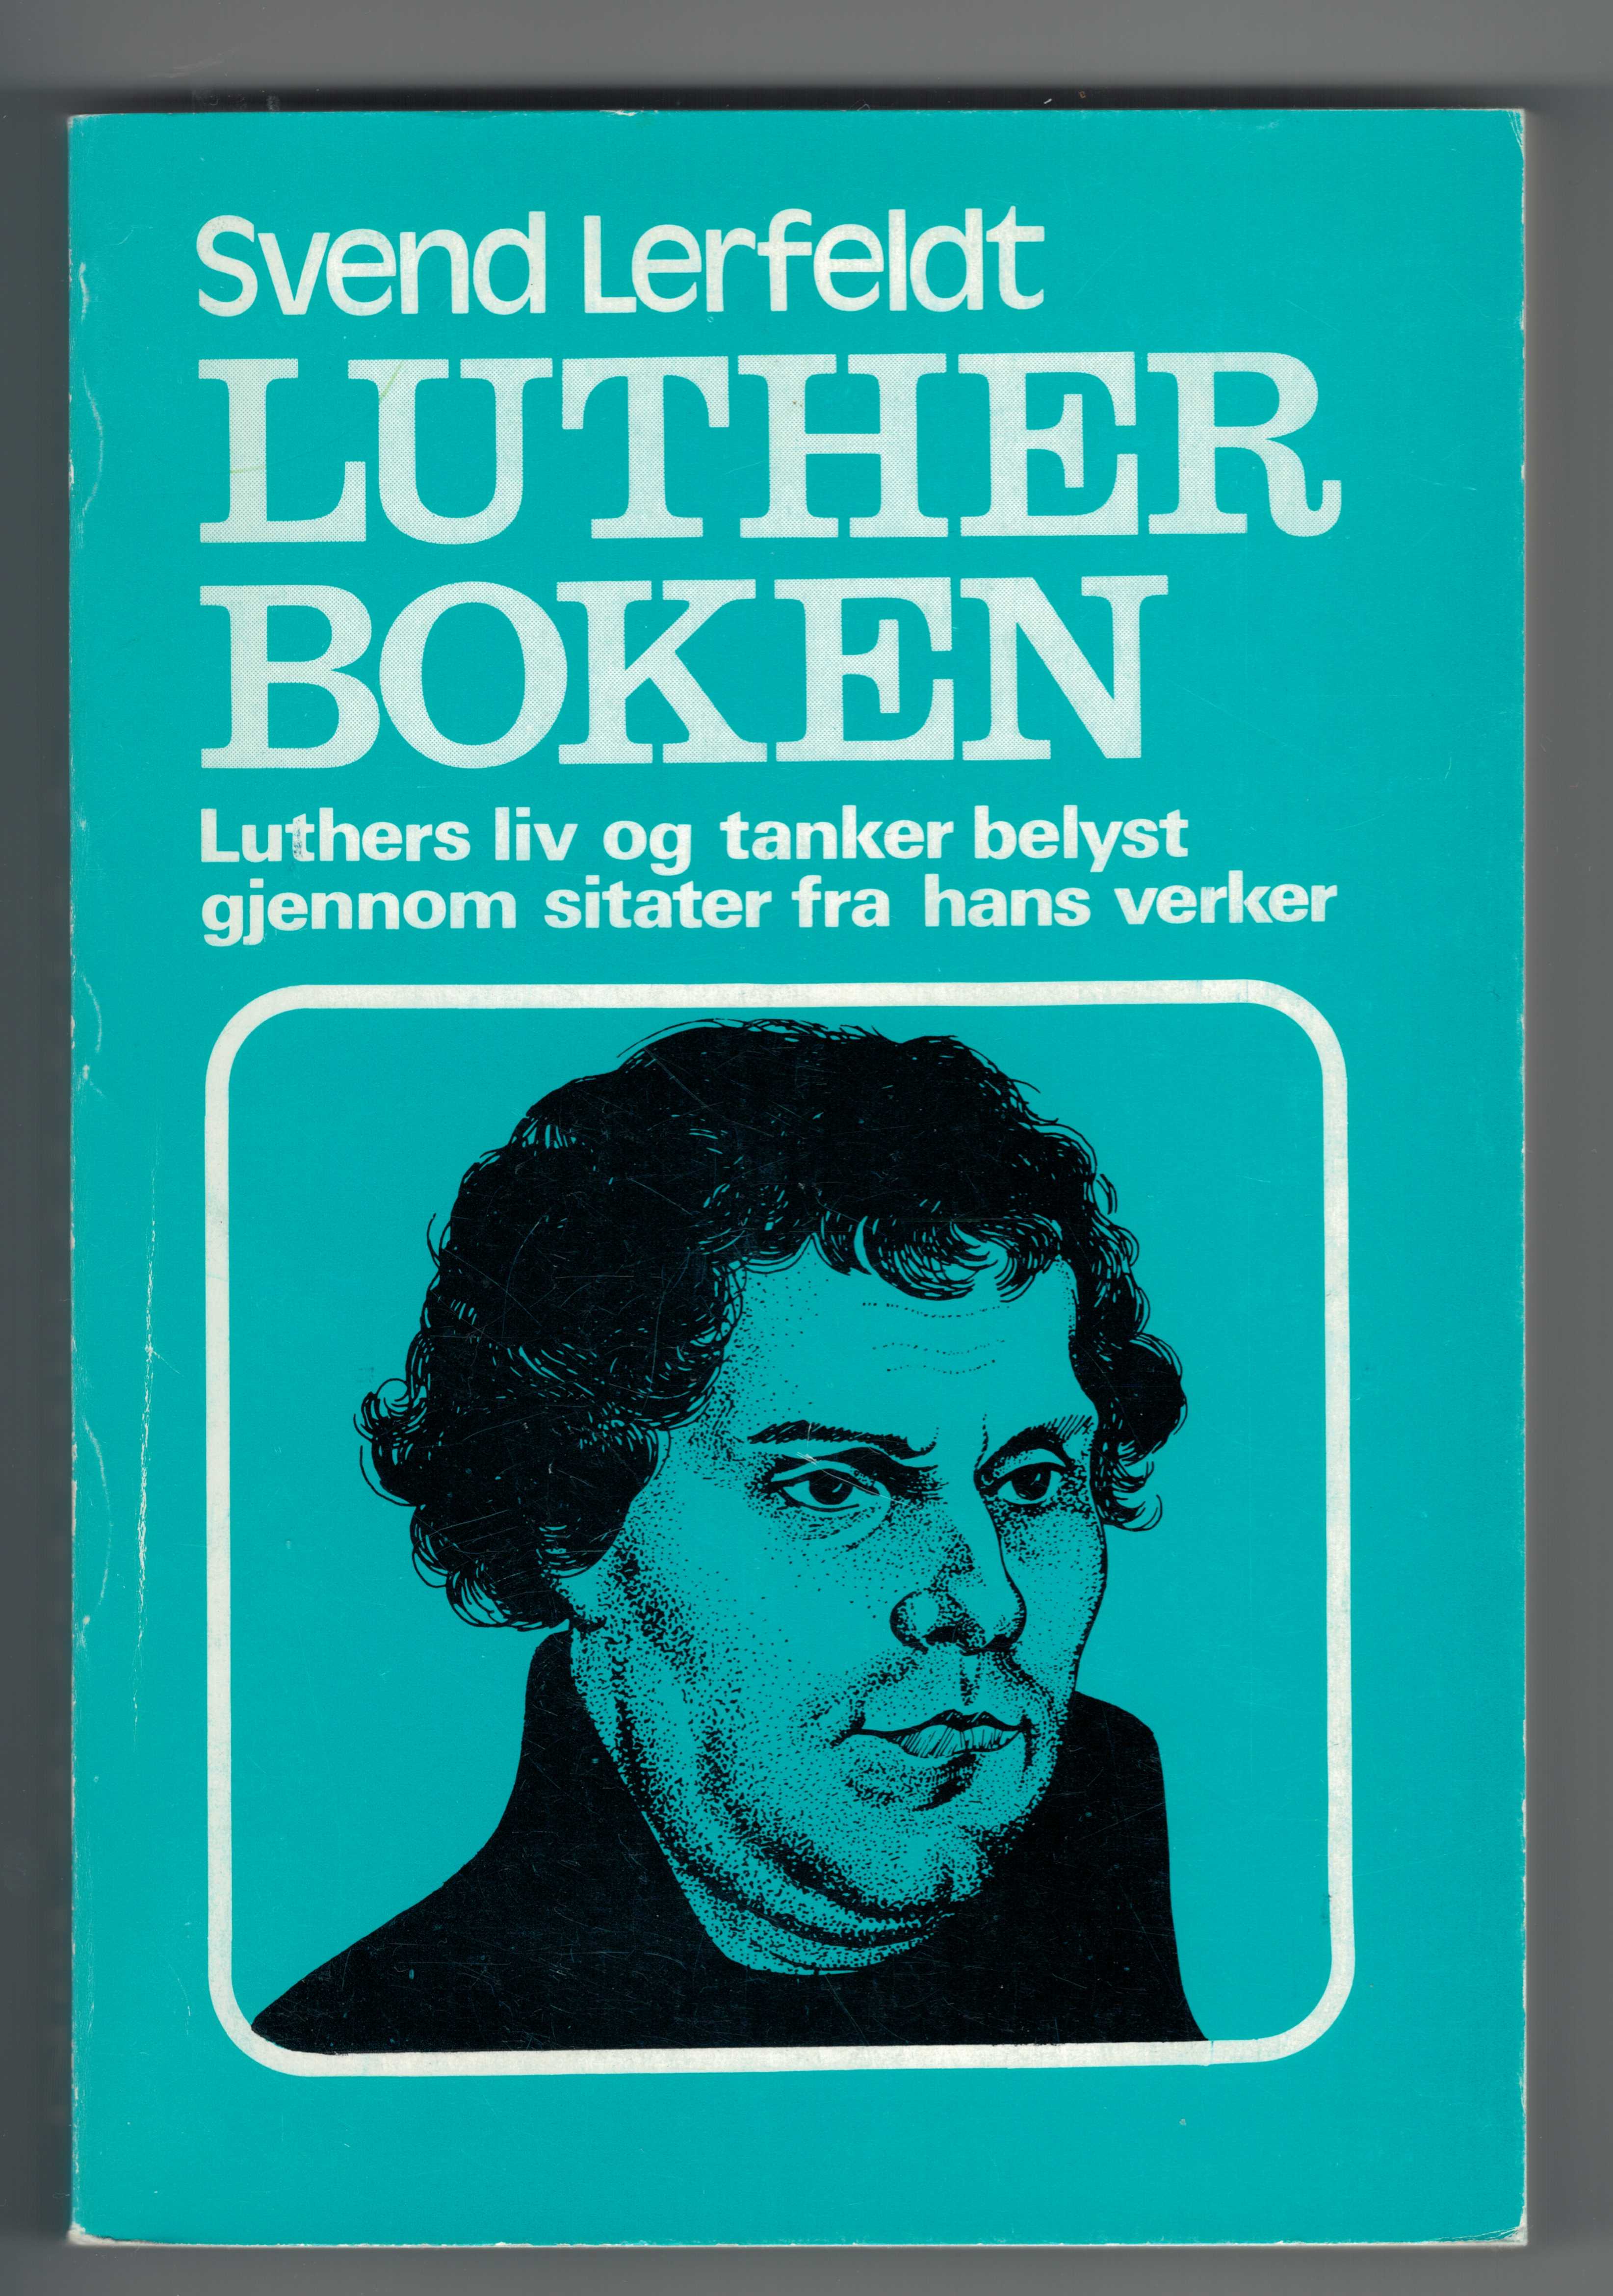 Lutherboken